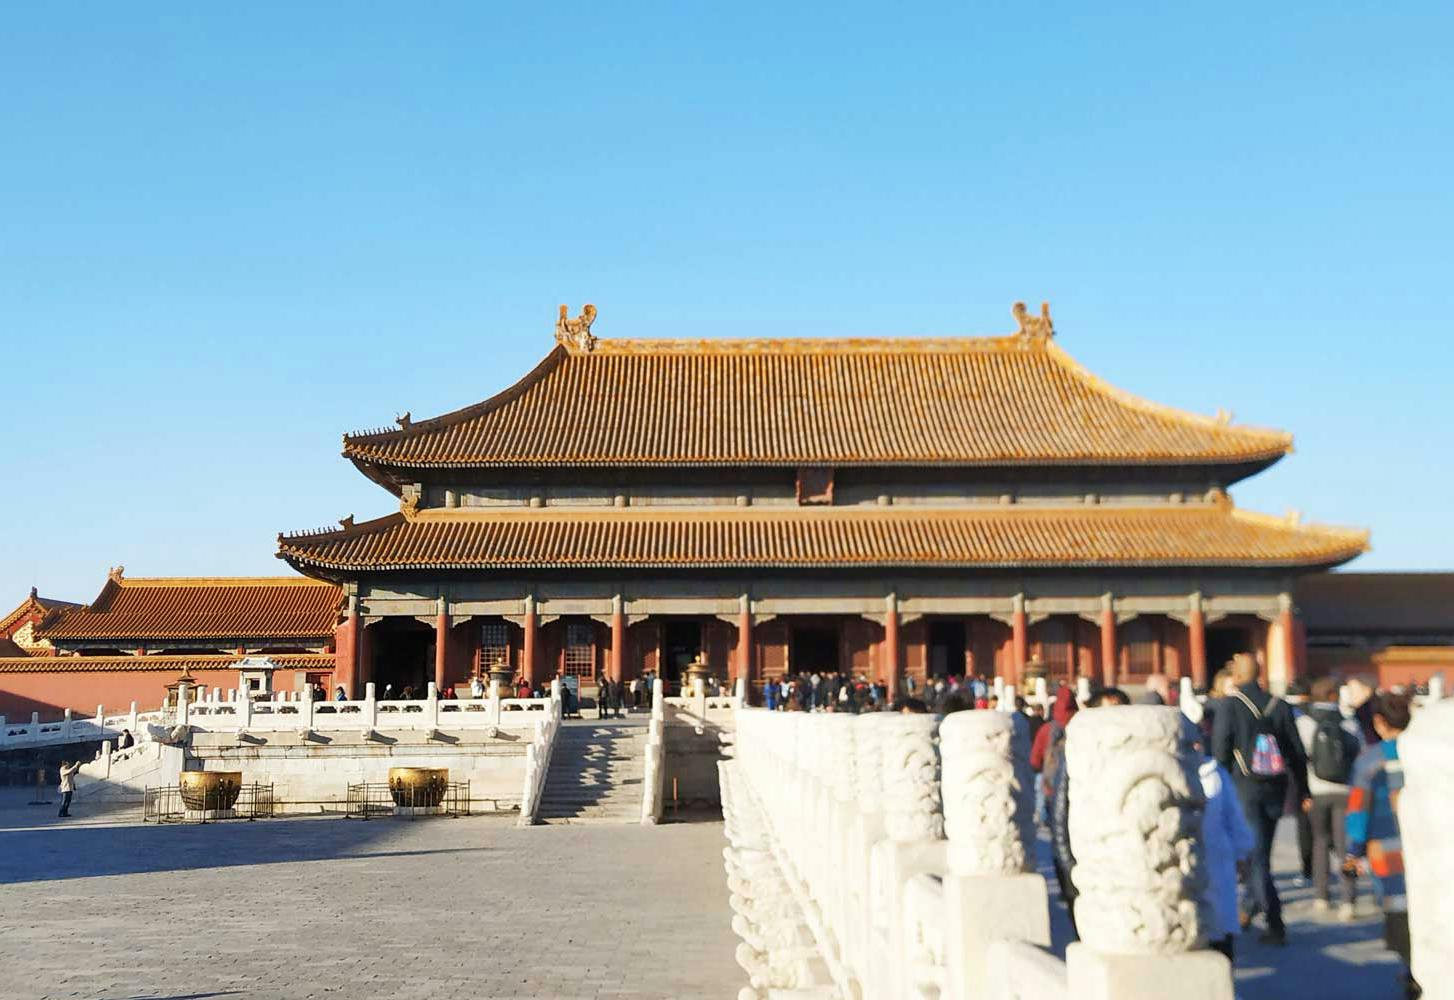 Beijing Private Tour of Tiananmen Square, Forbidden City and Mutianyu Great Wall